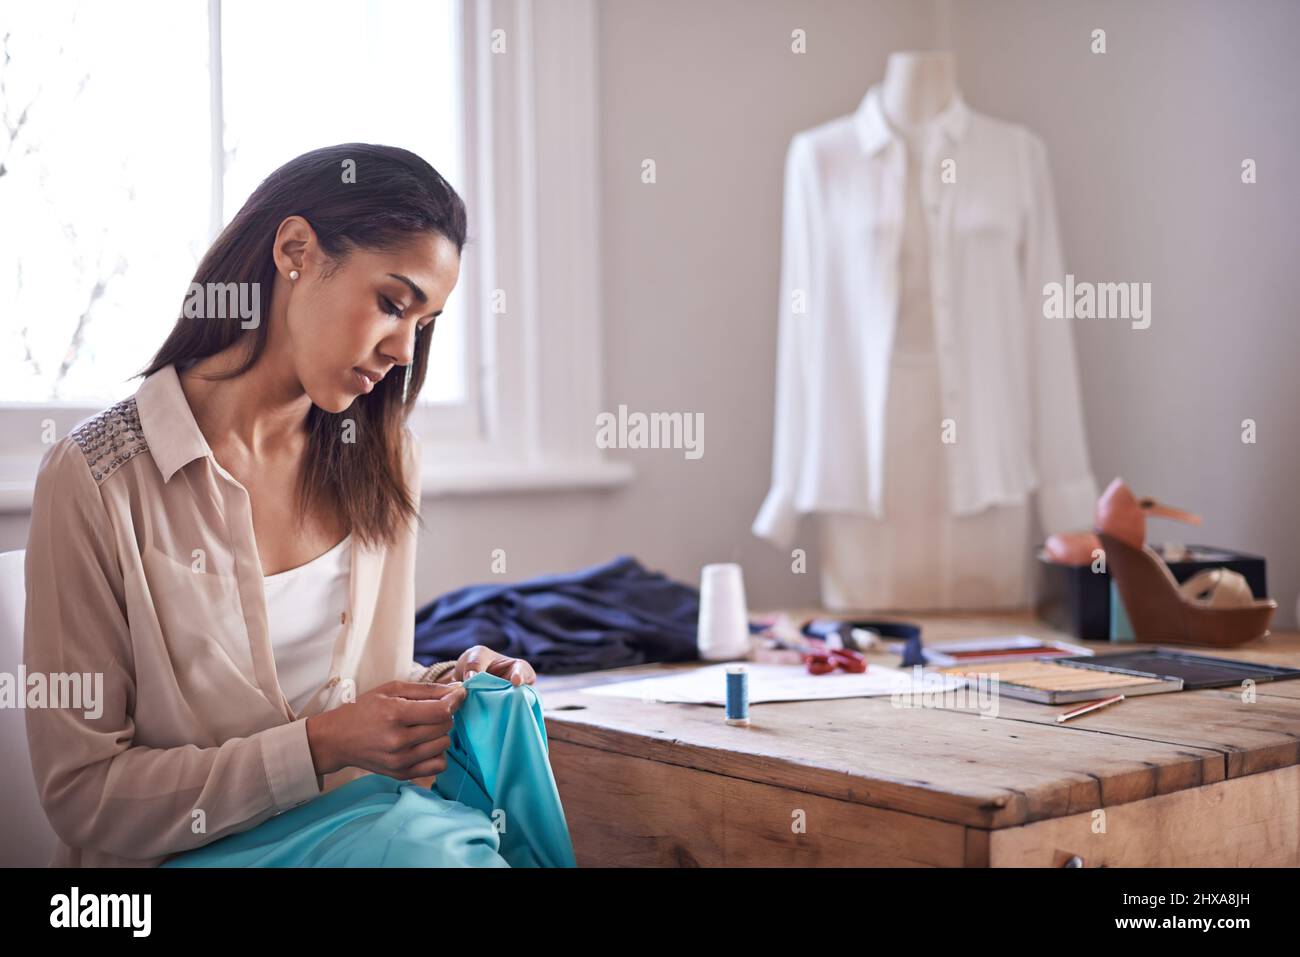 Fashion is a passion. Shot of a young fashion designer working on a new design. Stock Photo